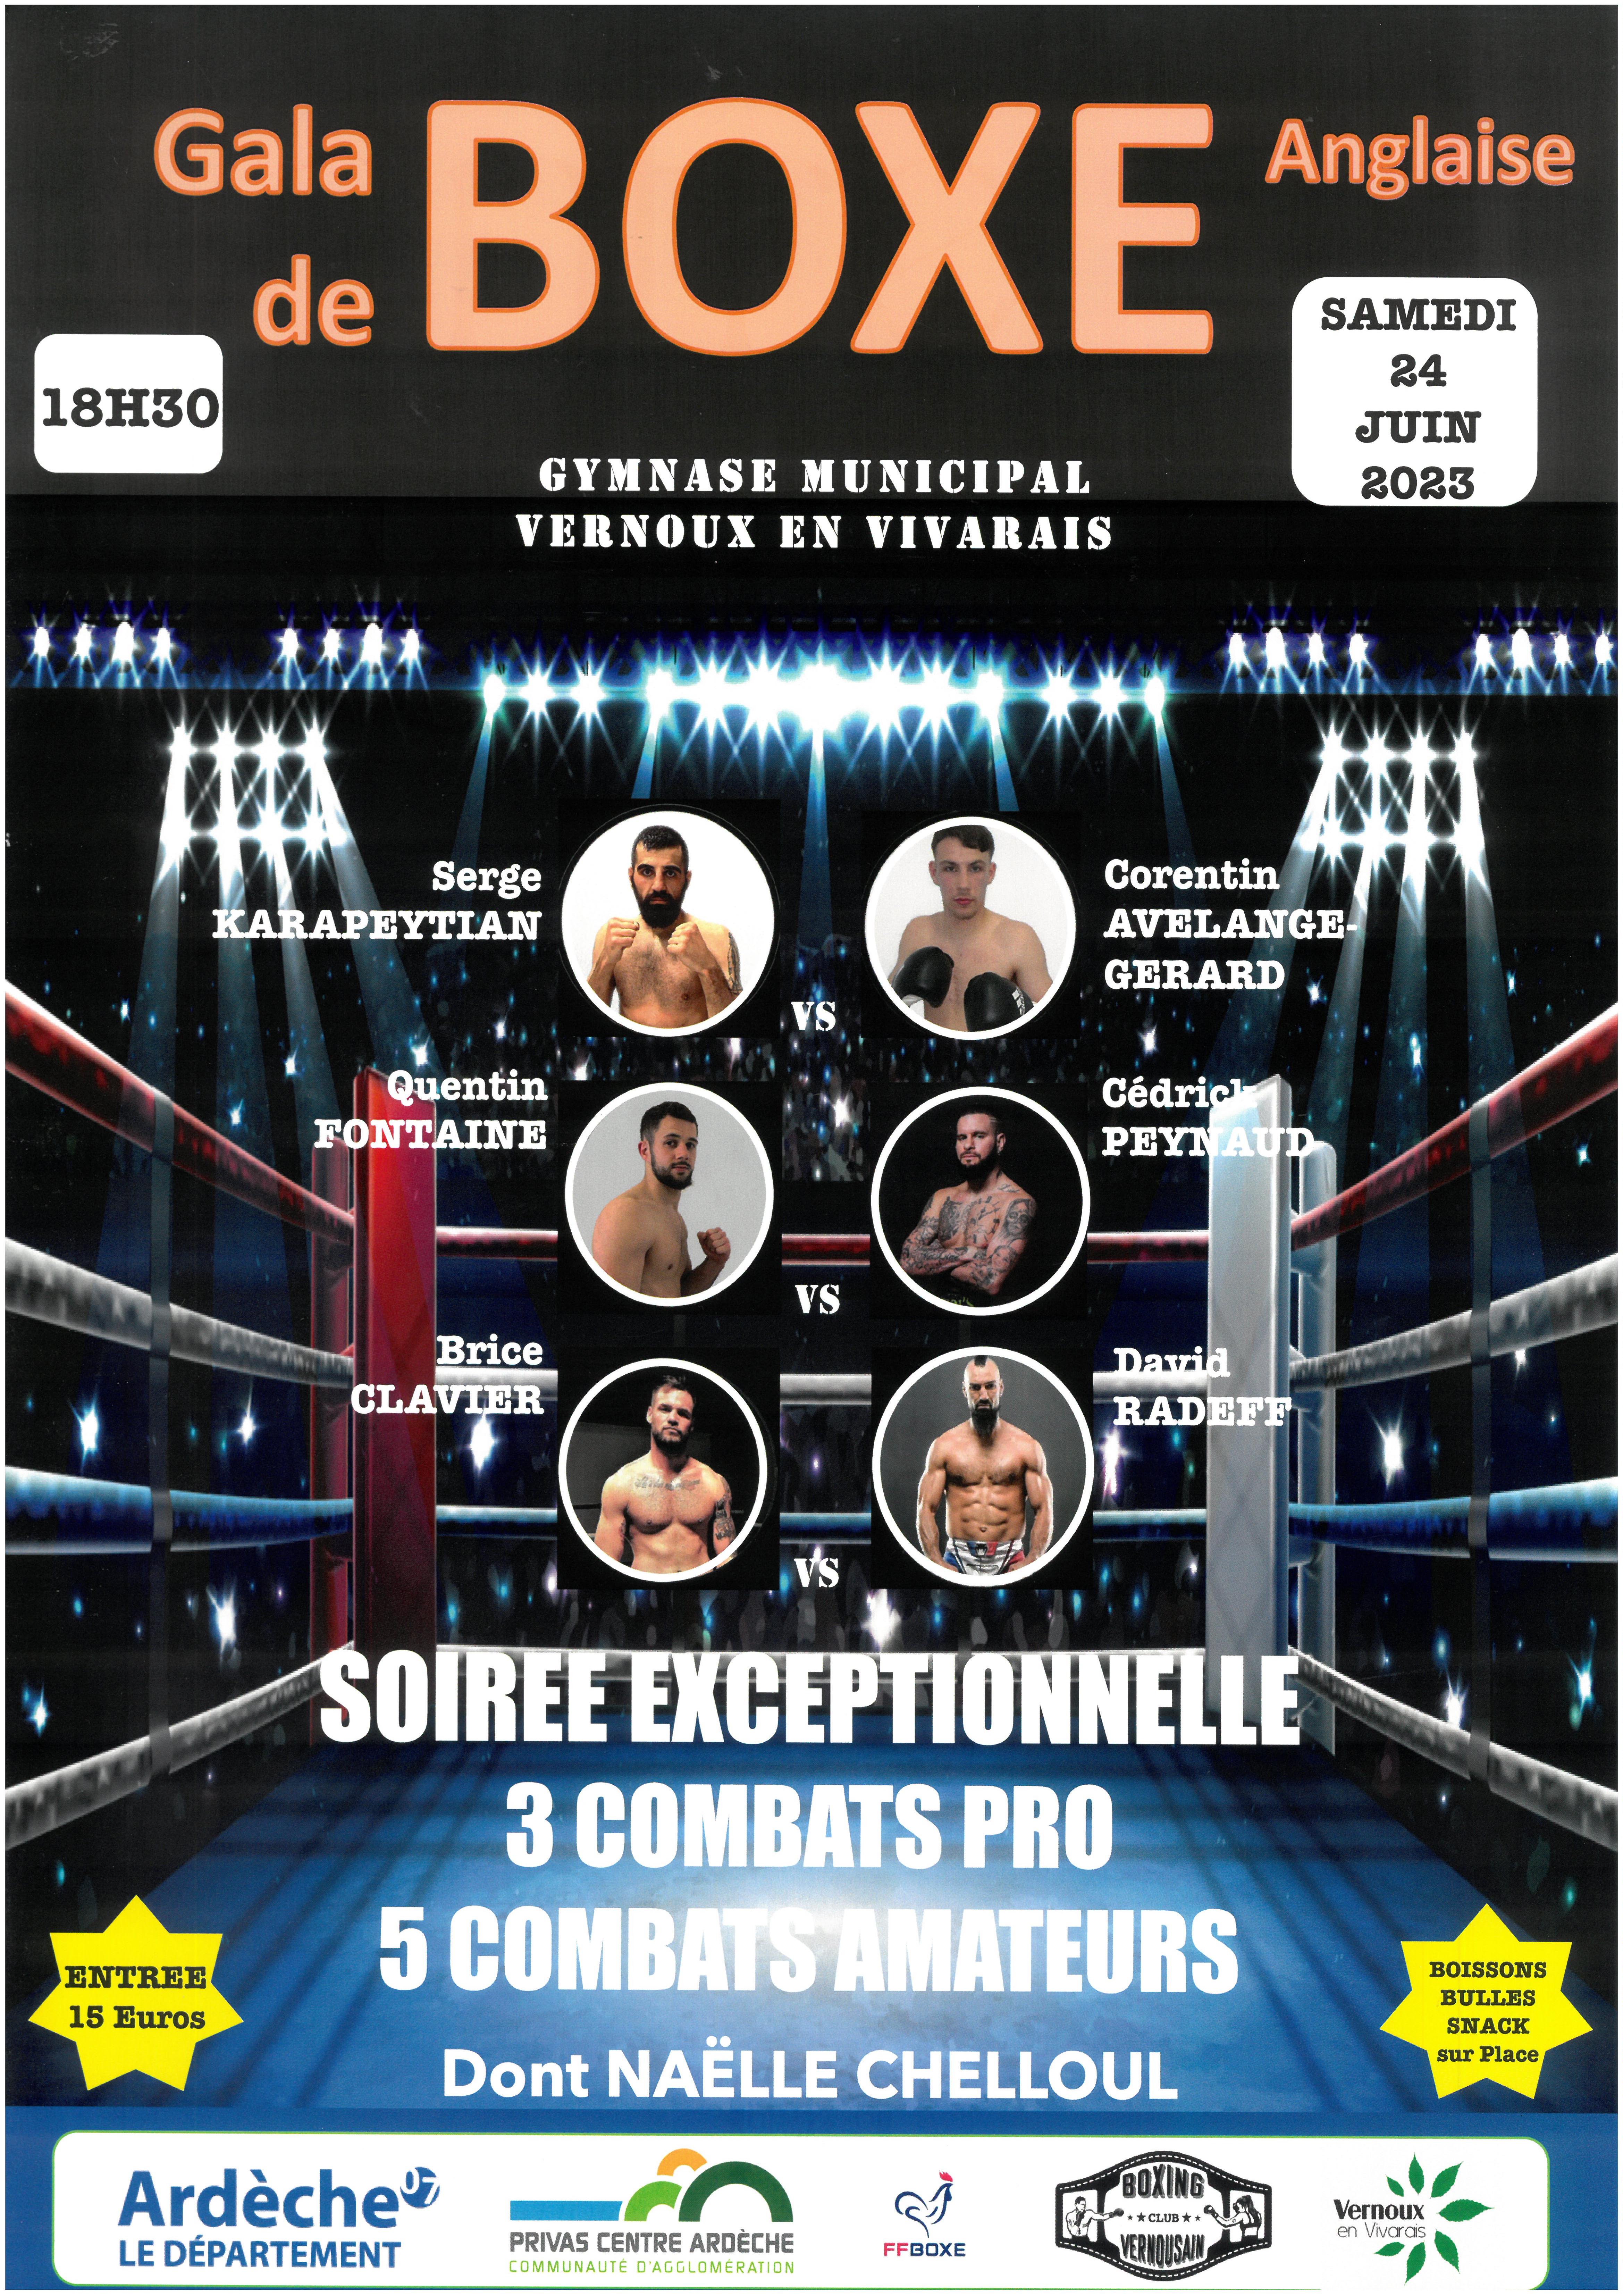 Events…Put it in your diary : Gala de boxe anglaise